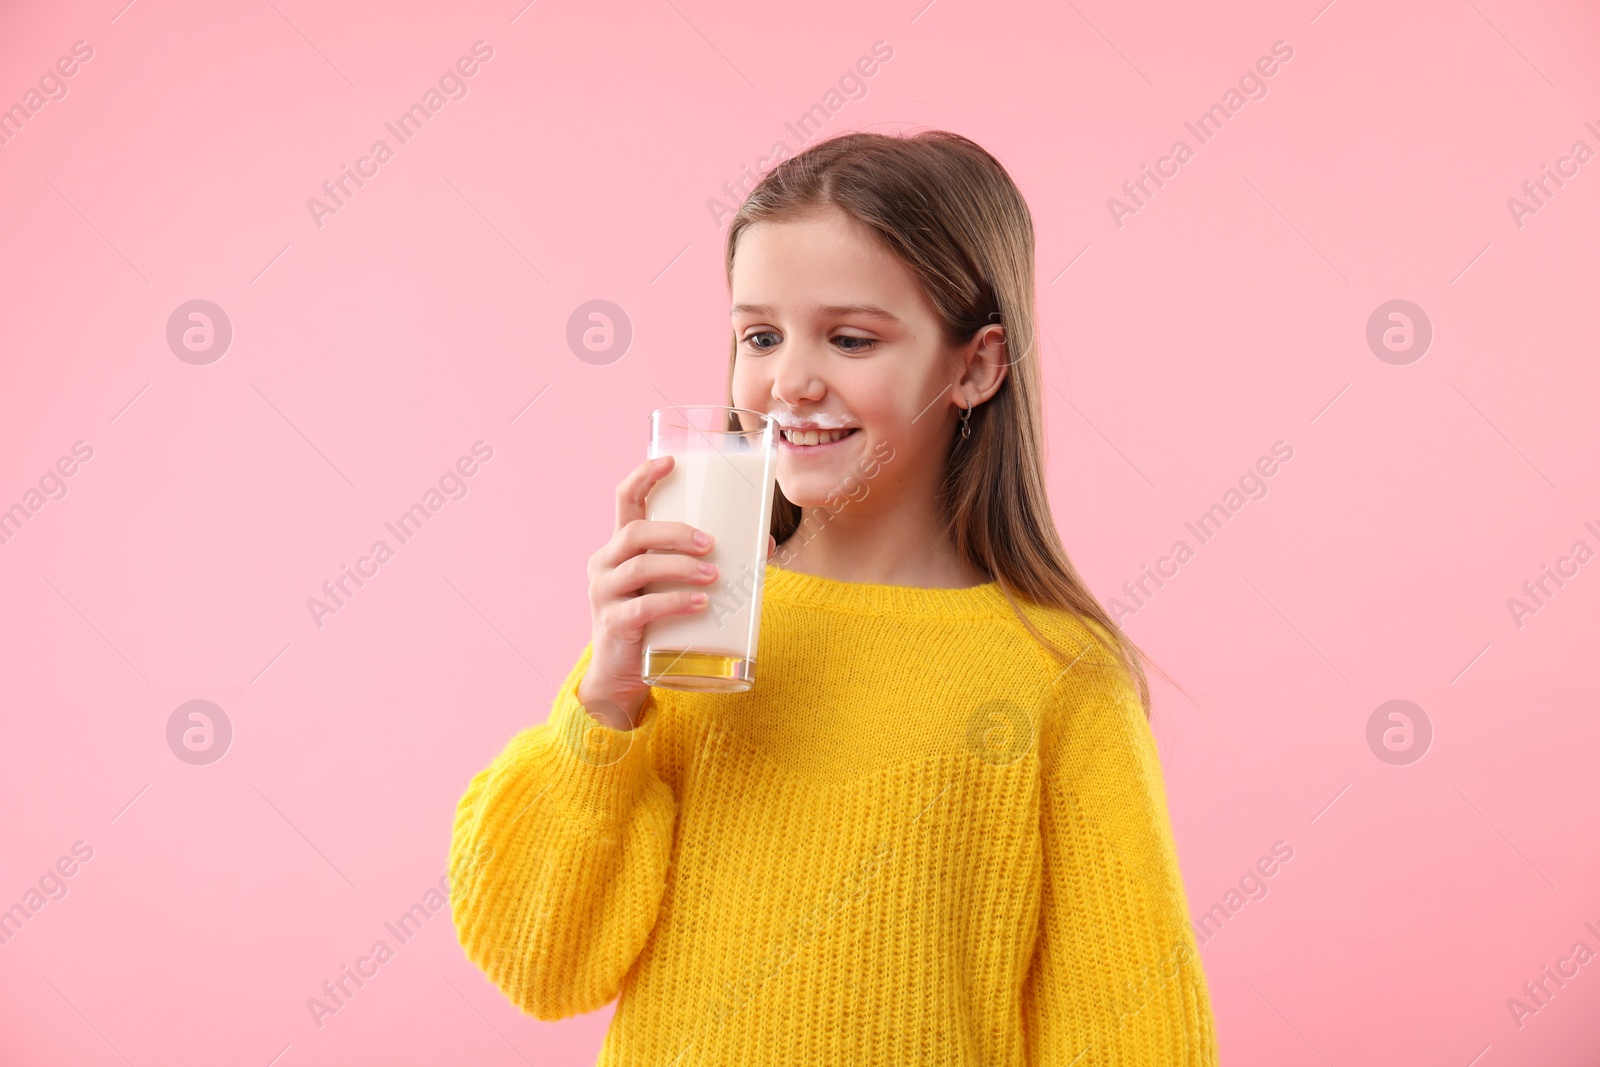 Photo of Happy little girl with milk mustache holding glass of tasty dairy drink on pink background